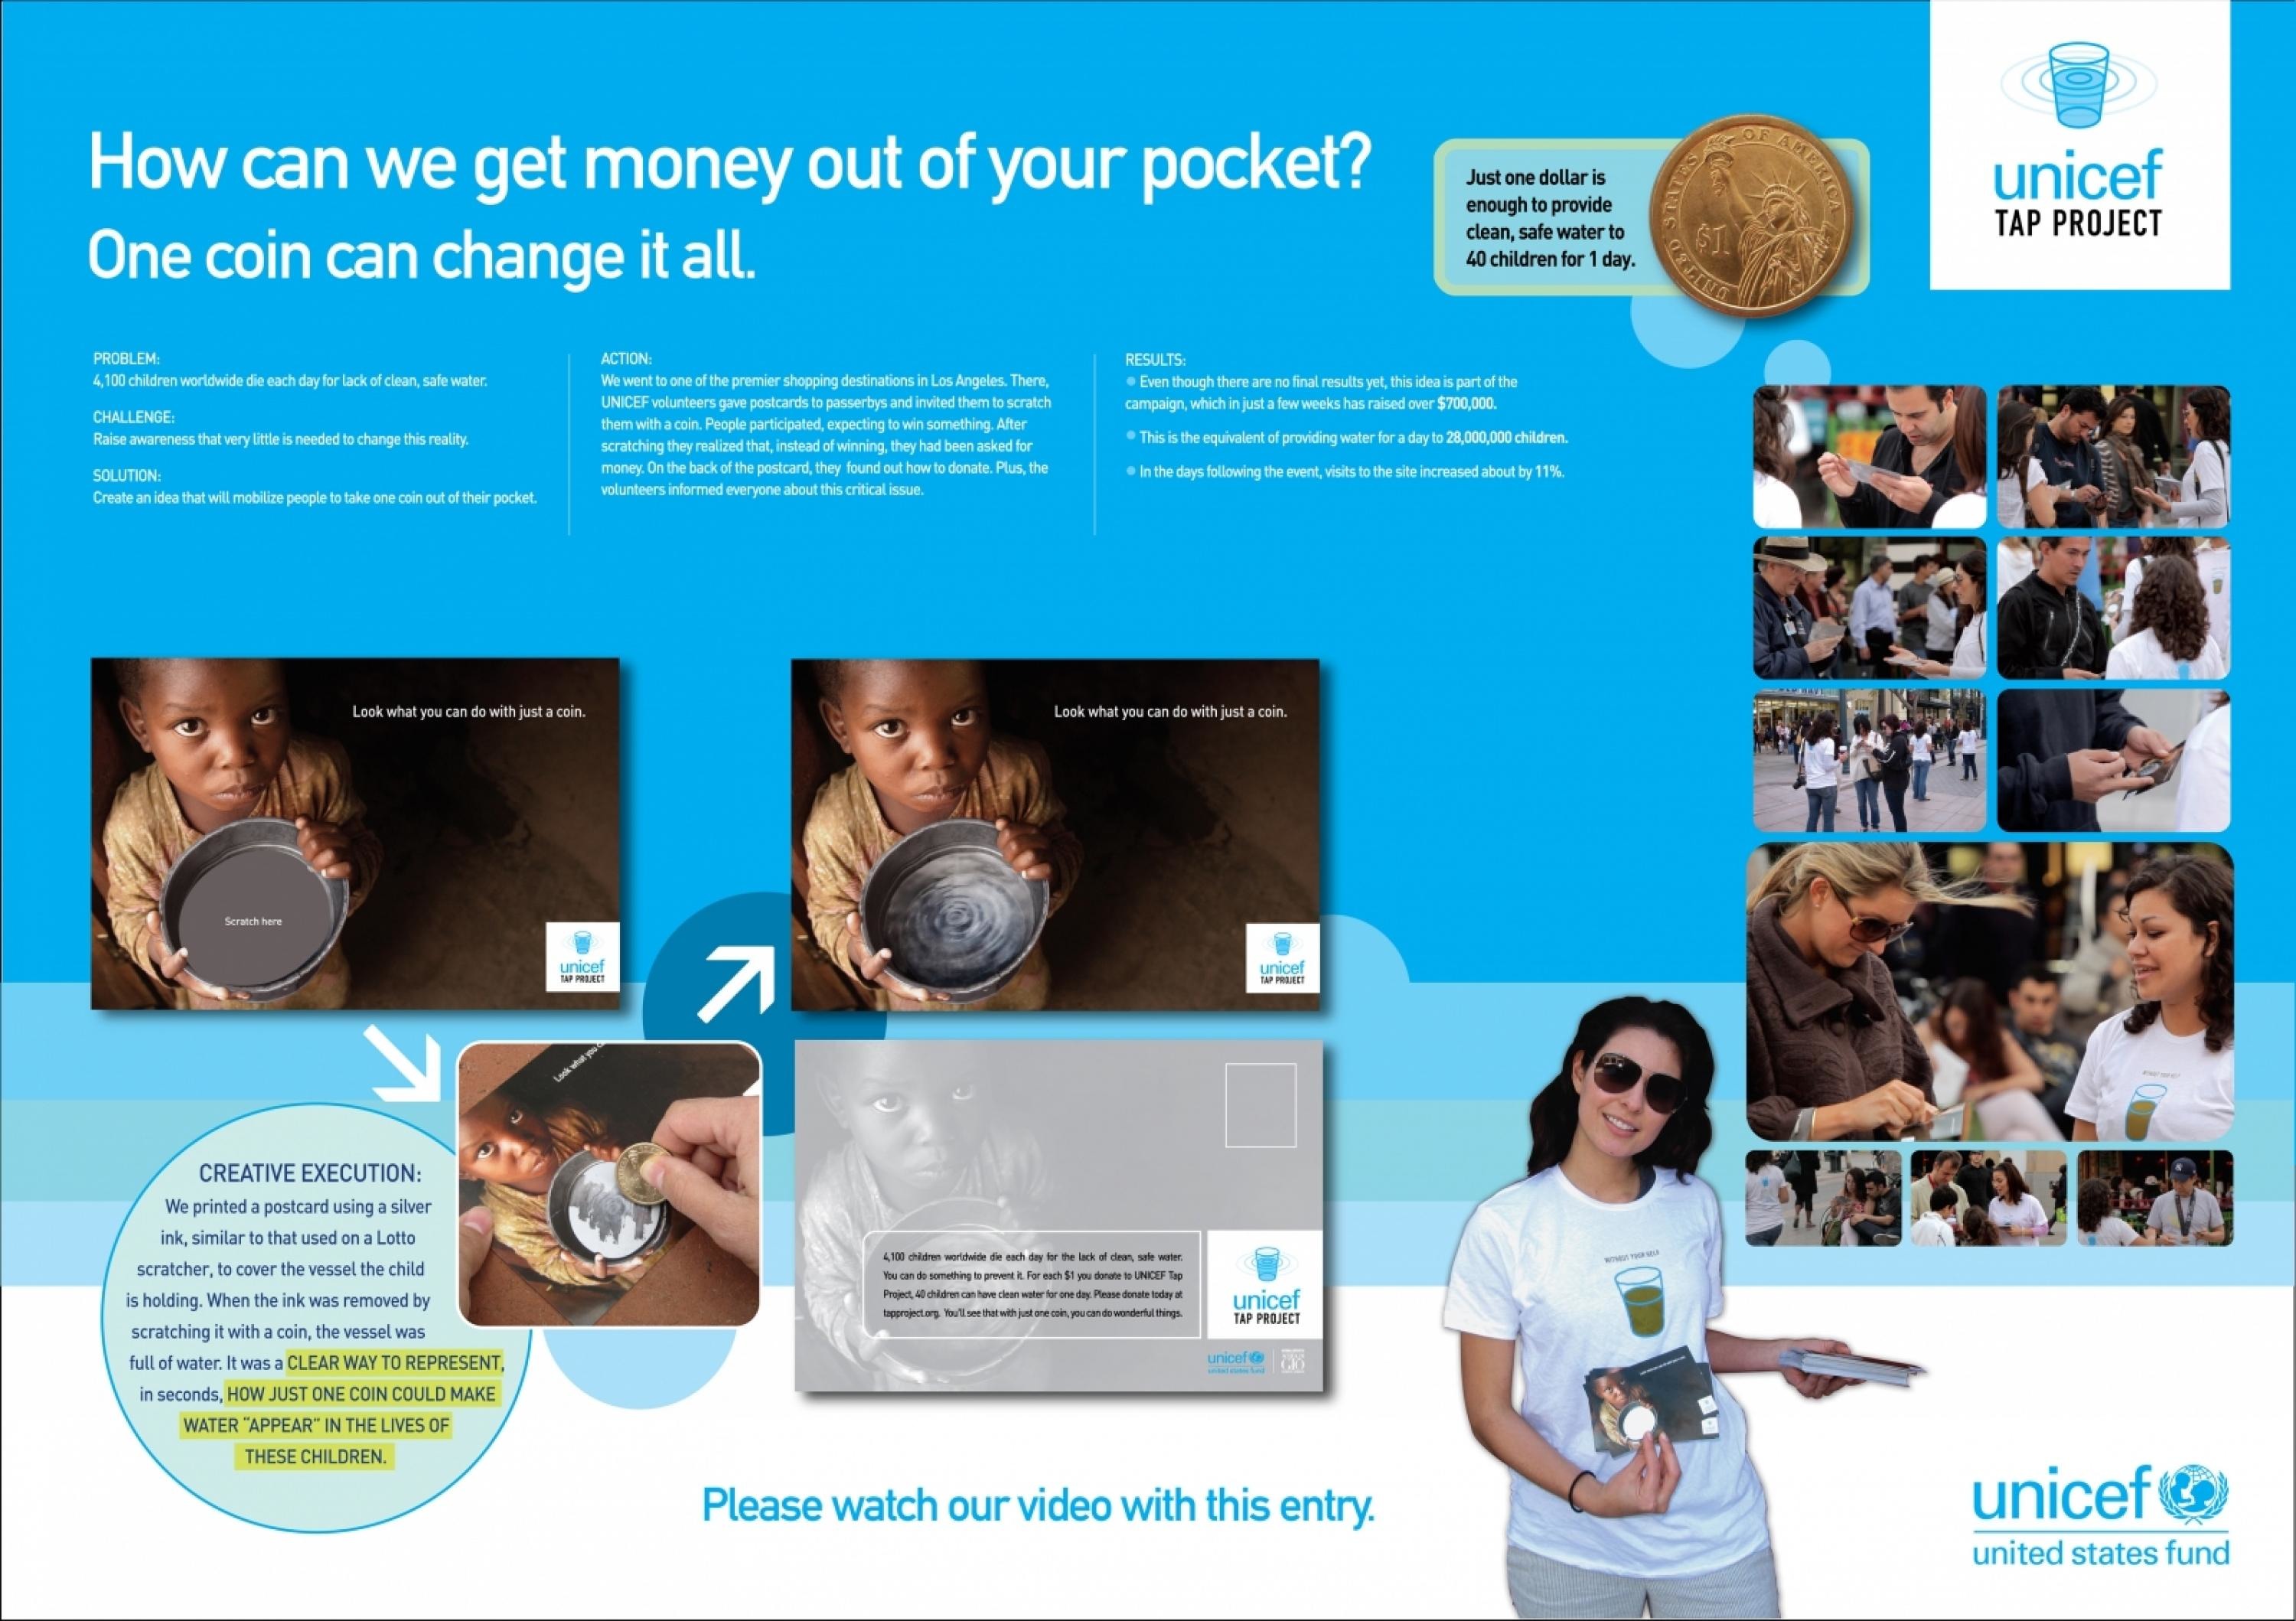 UNICEF TAP PROJECT